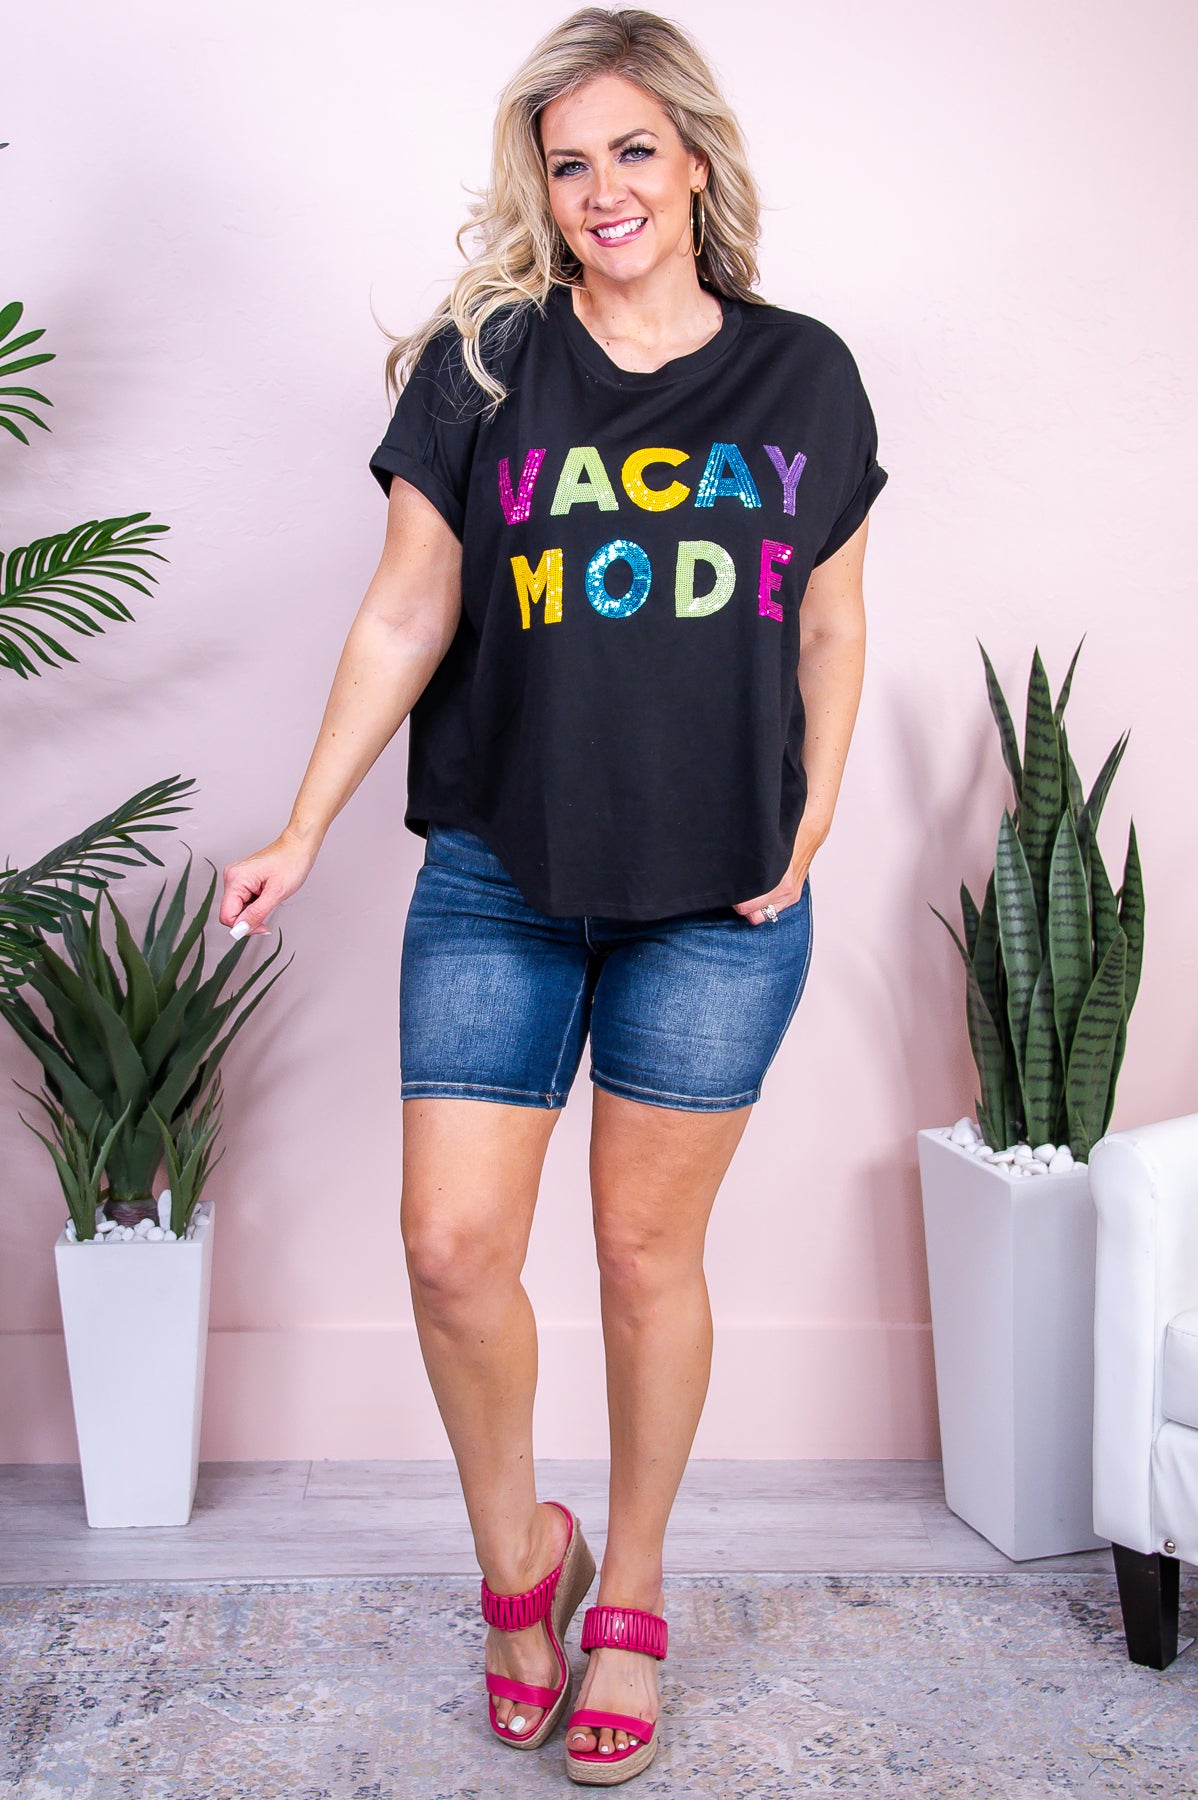 Vacay Mode Black/Multi Color Sequin High-Low Top - T9749BK